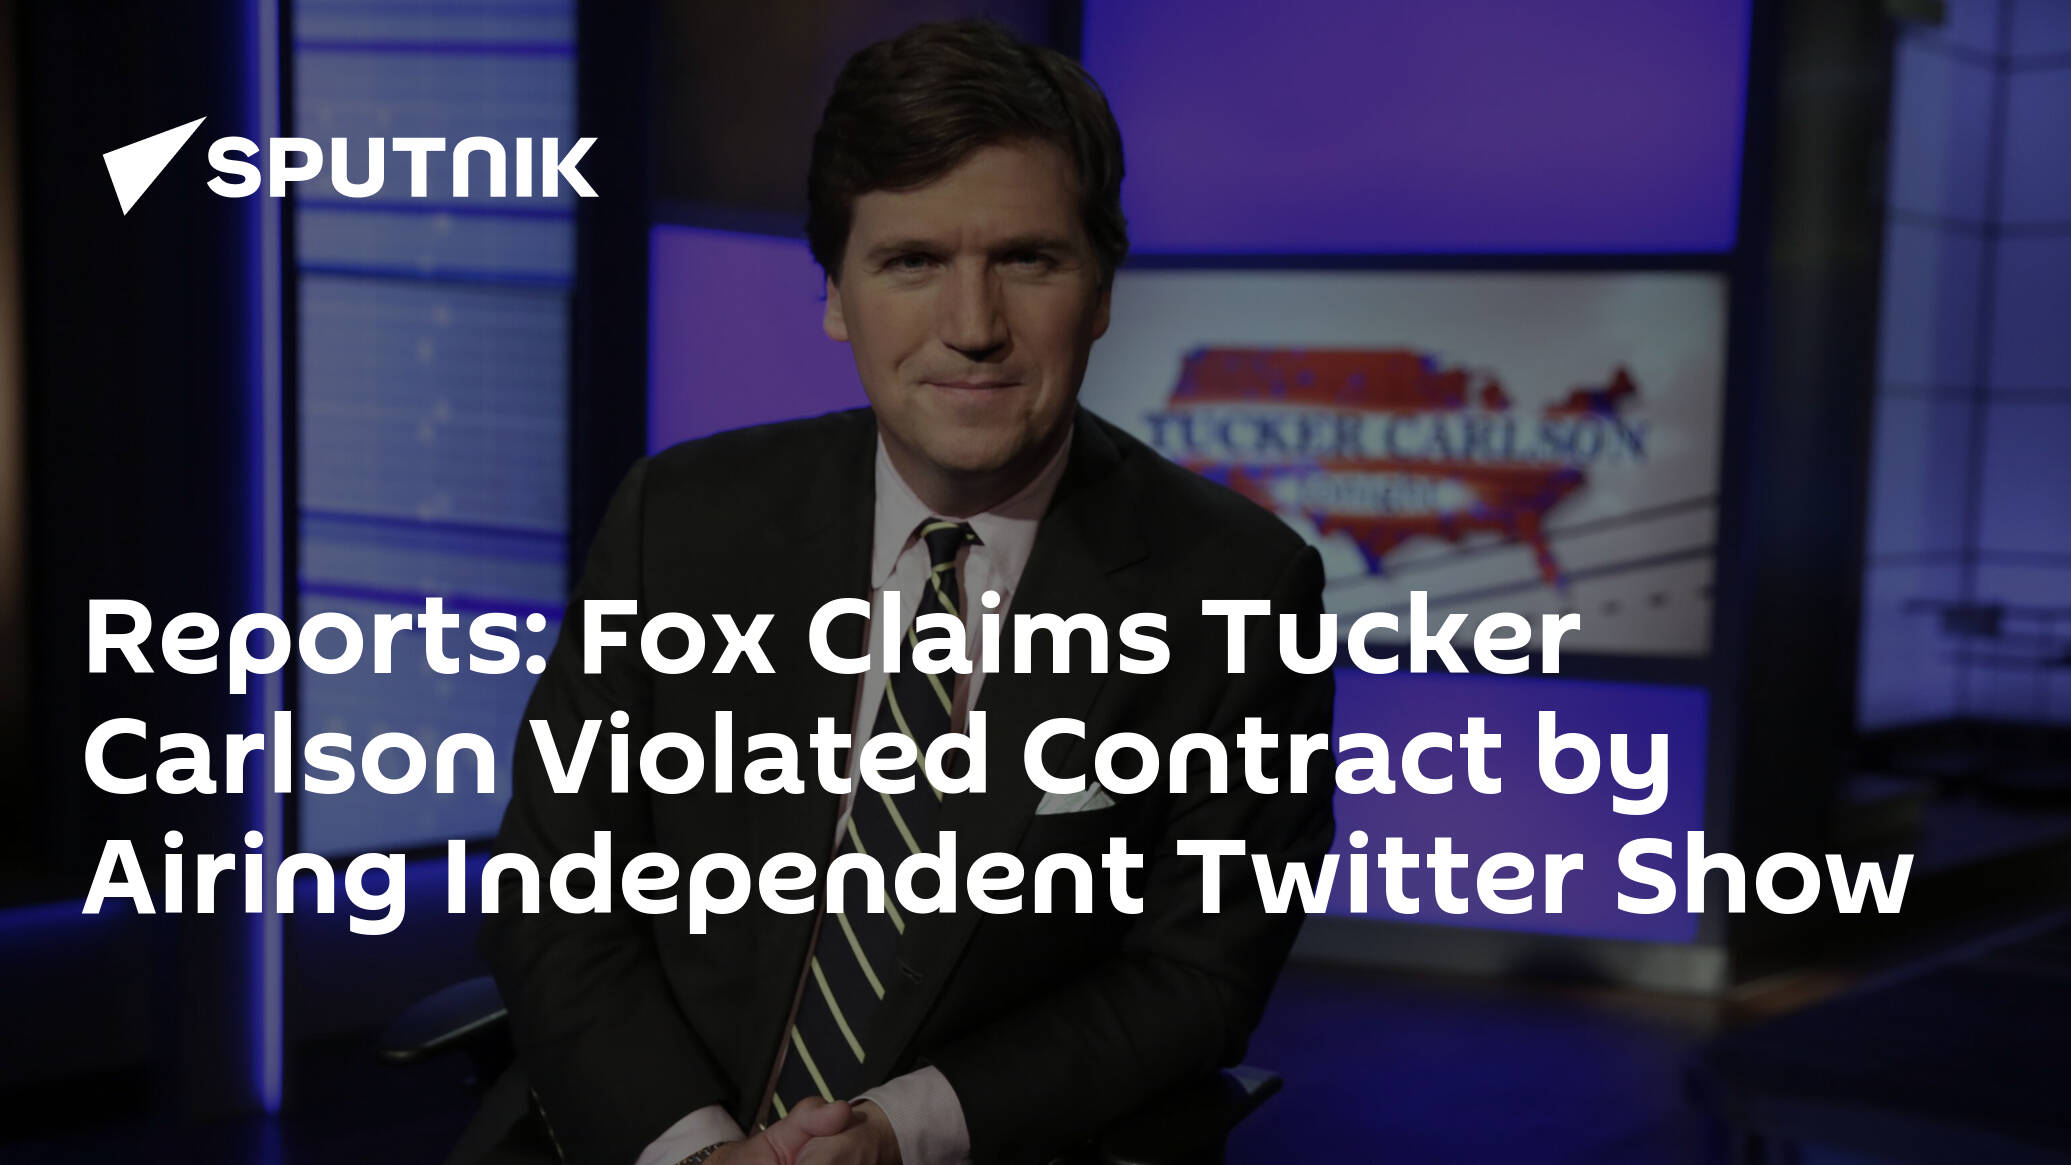 Reports: Fox Claims Tucker Carlson Violated Contract by Airing Independent Twitter Show